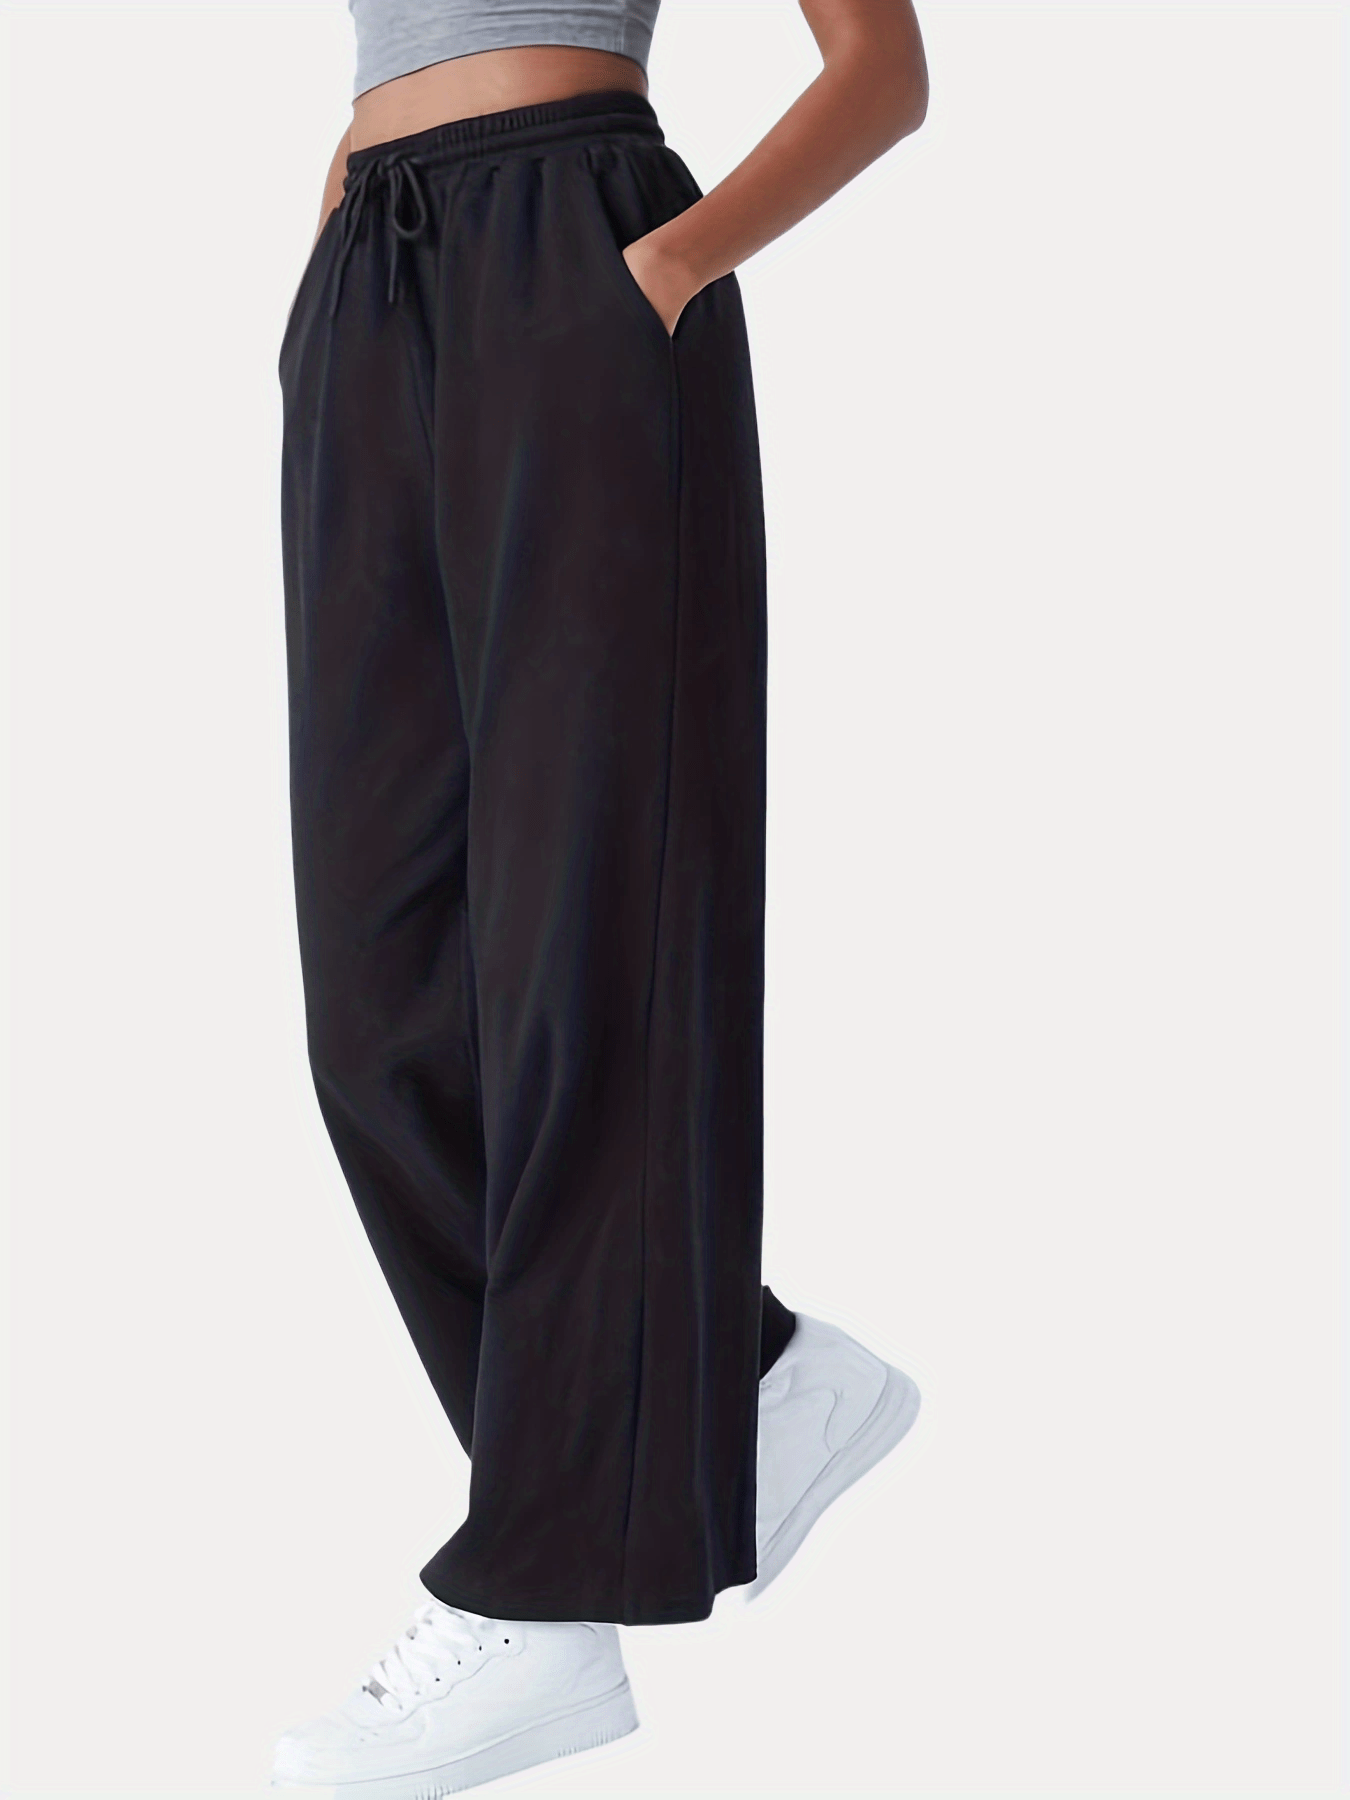 Drawstring High-Waisted Tracksuit Pants Women's Loose Bunched Feet